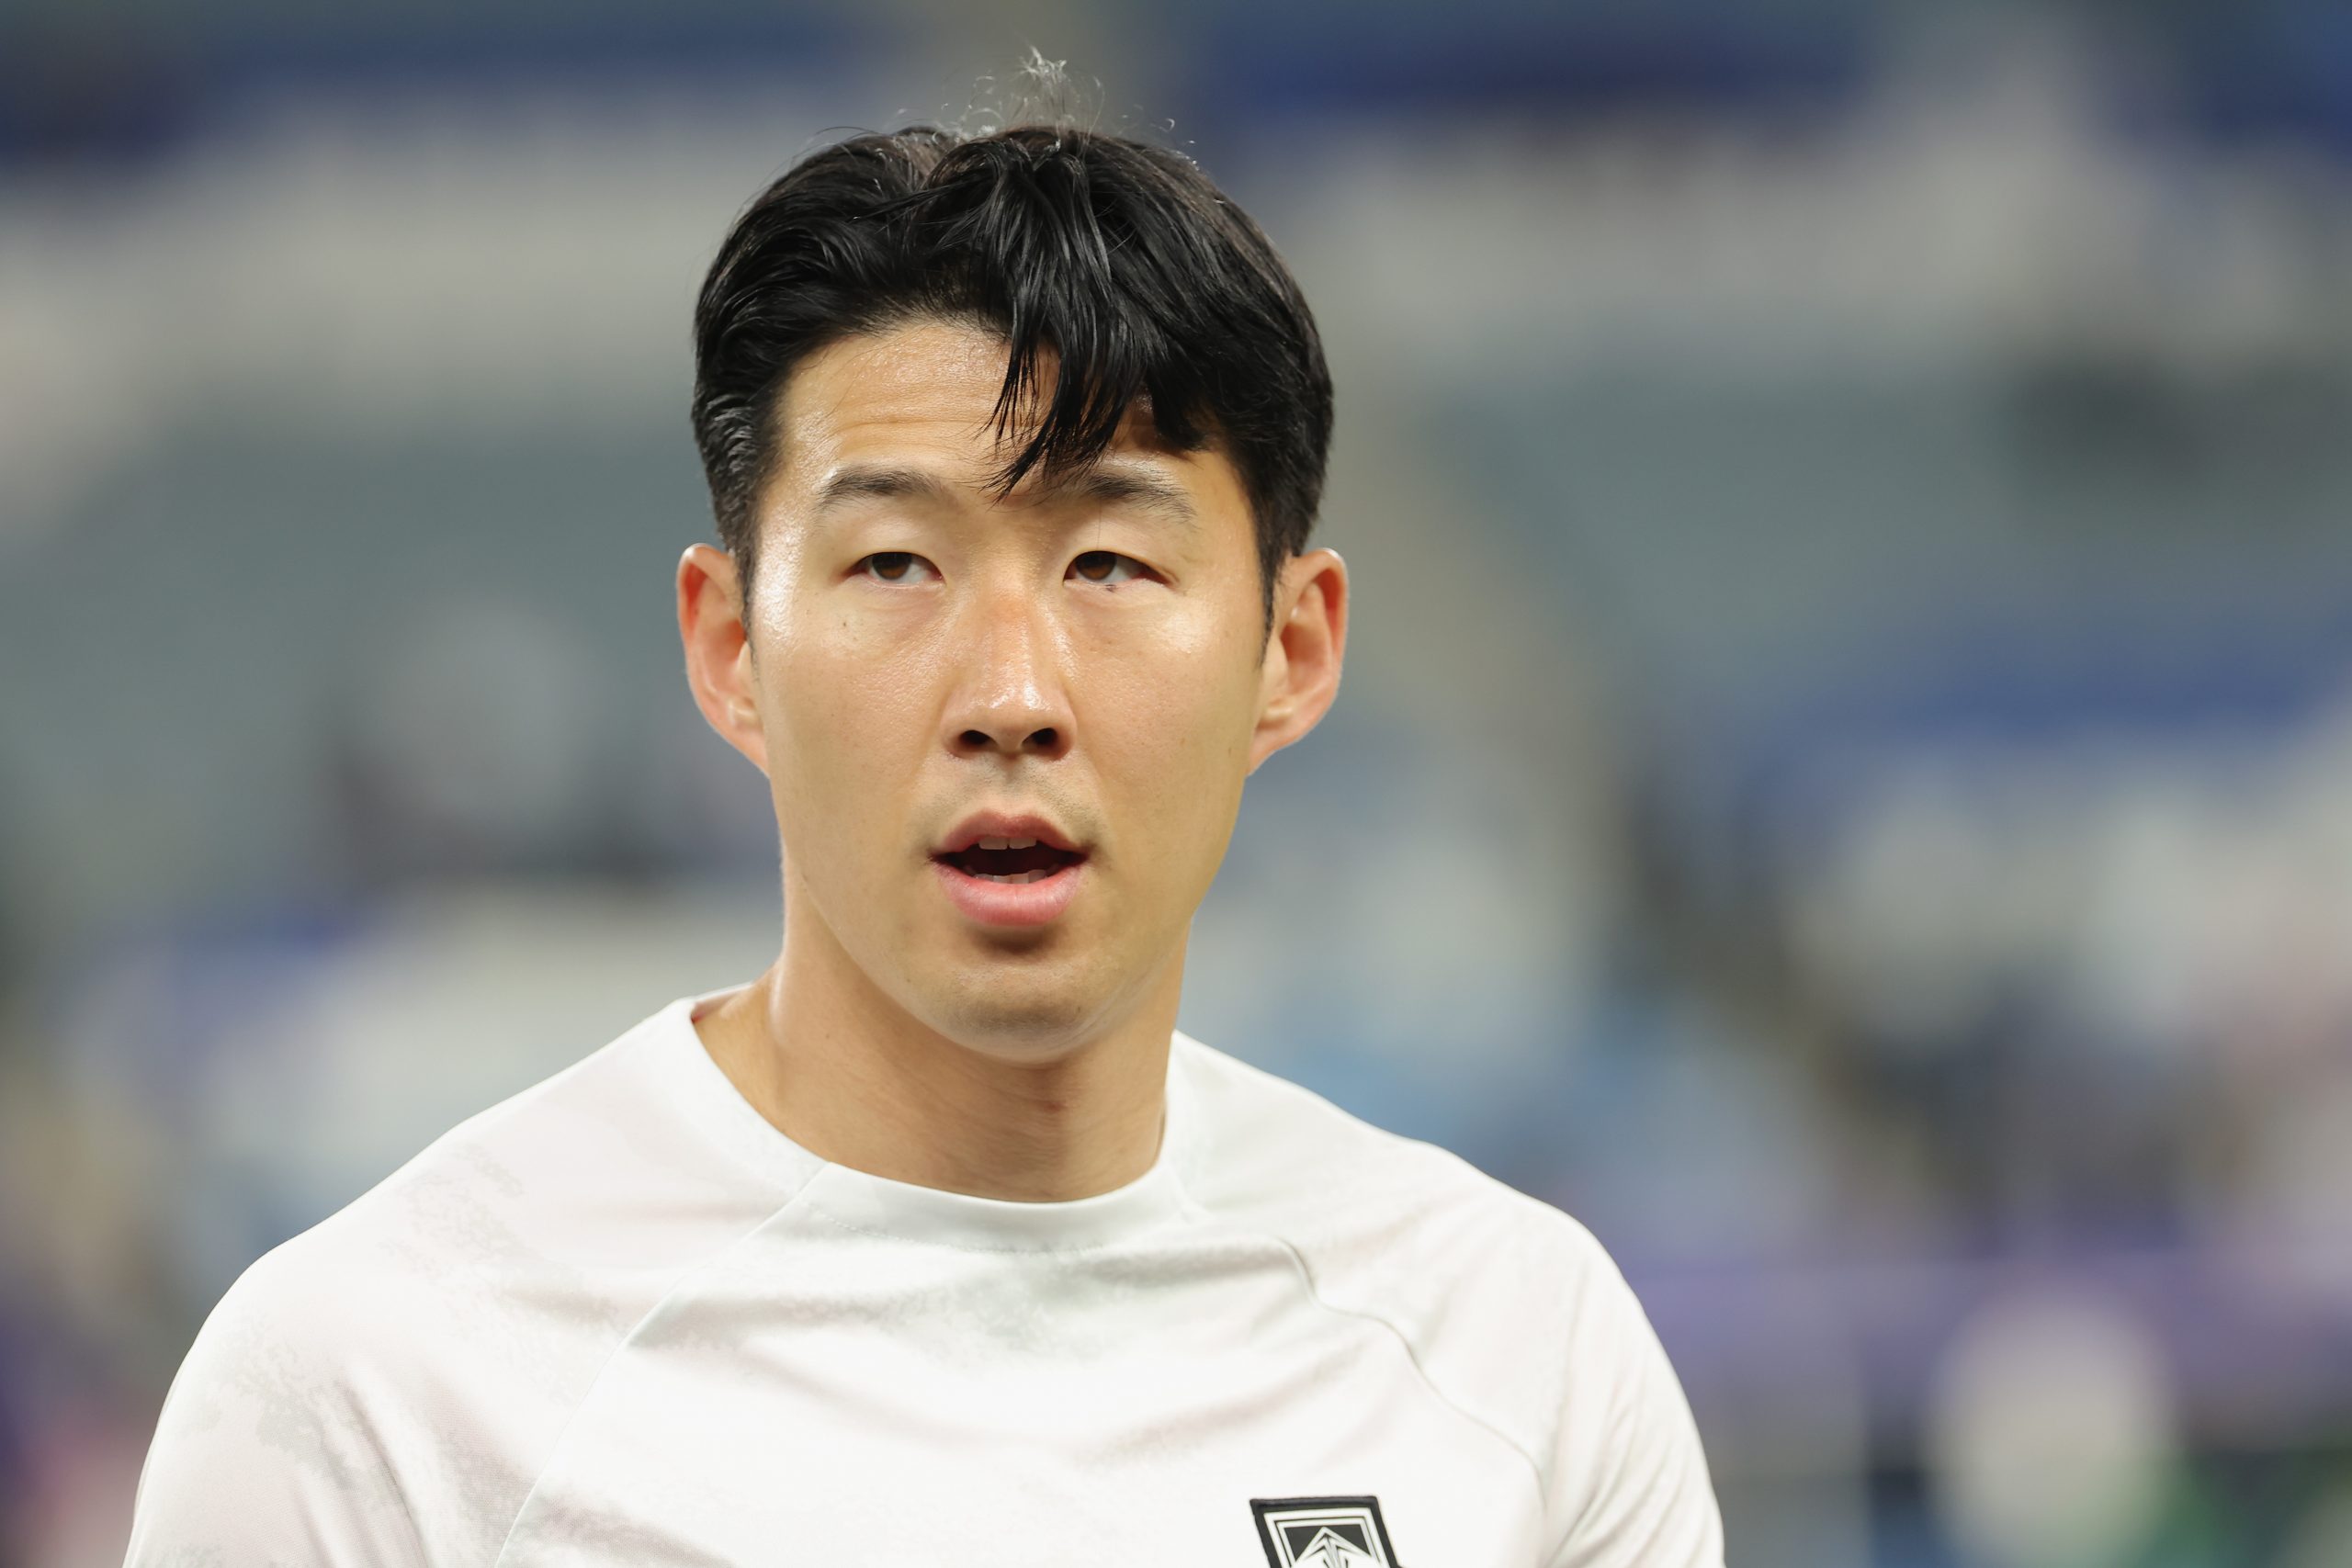 Son Heung-min showed appreciation for his Tottenham Hotspur teammates who gave him 'what he needed' following his return